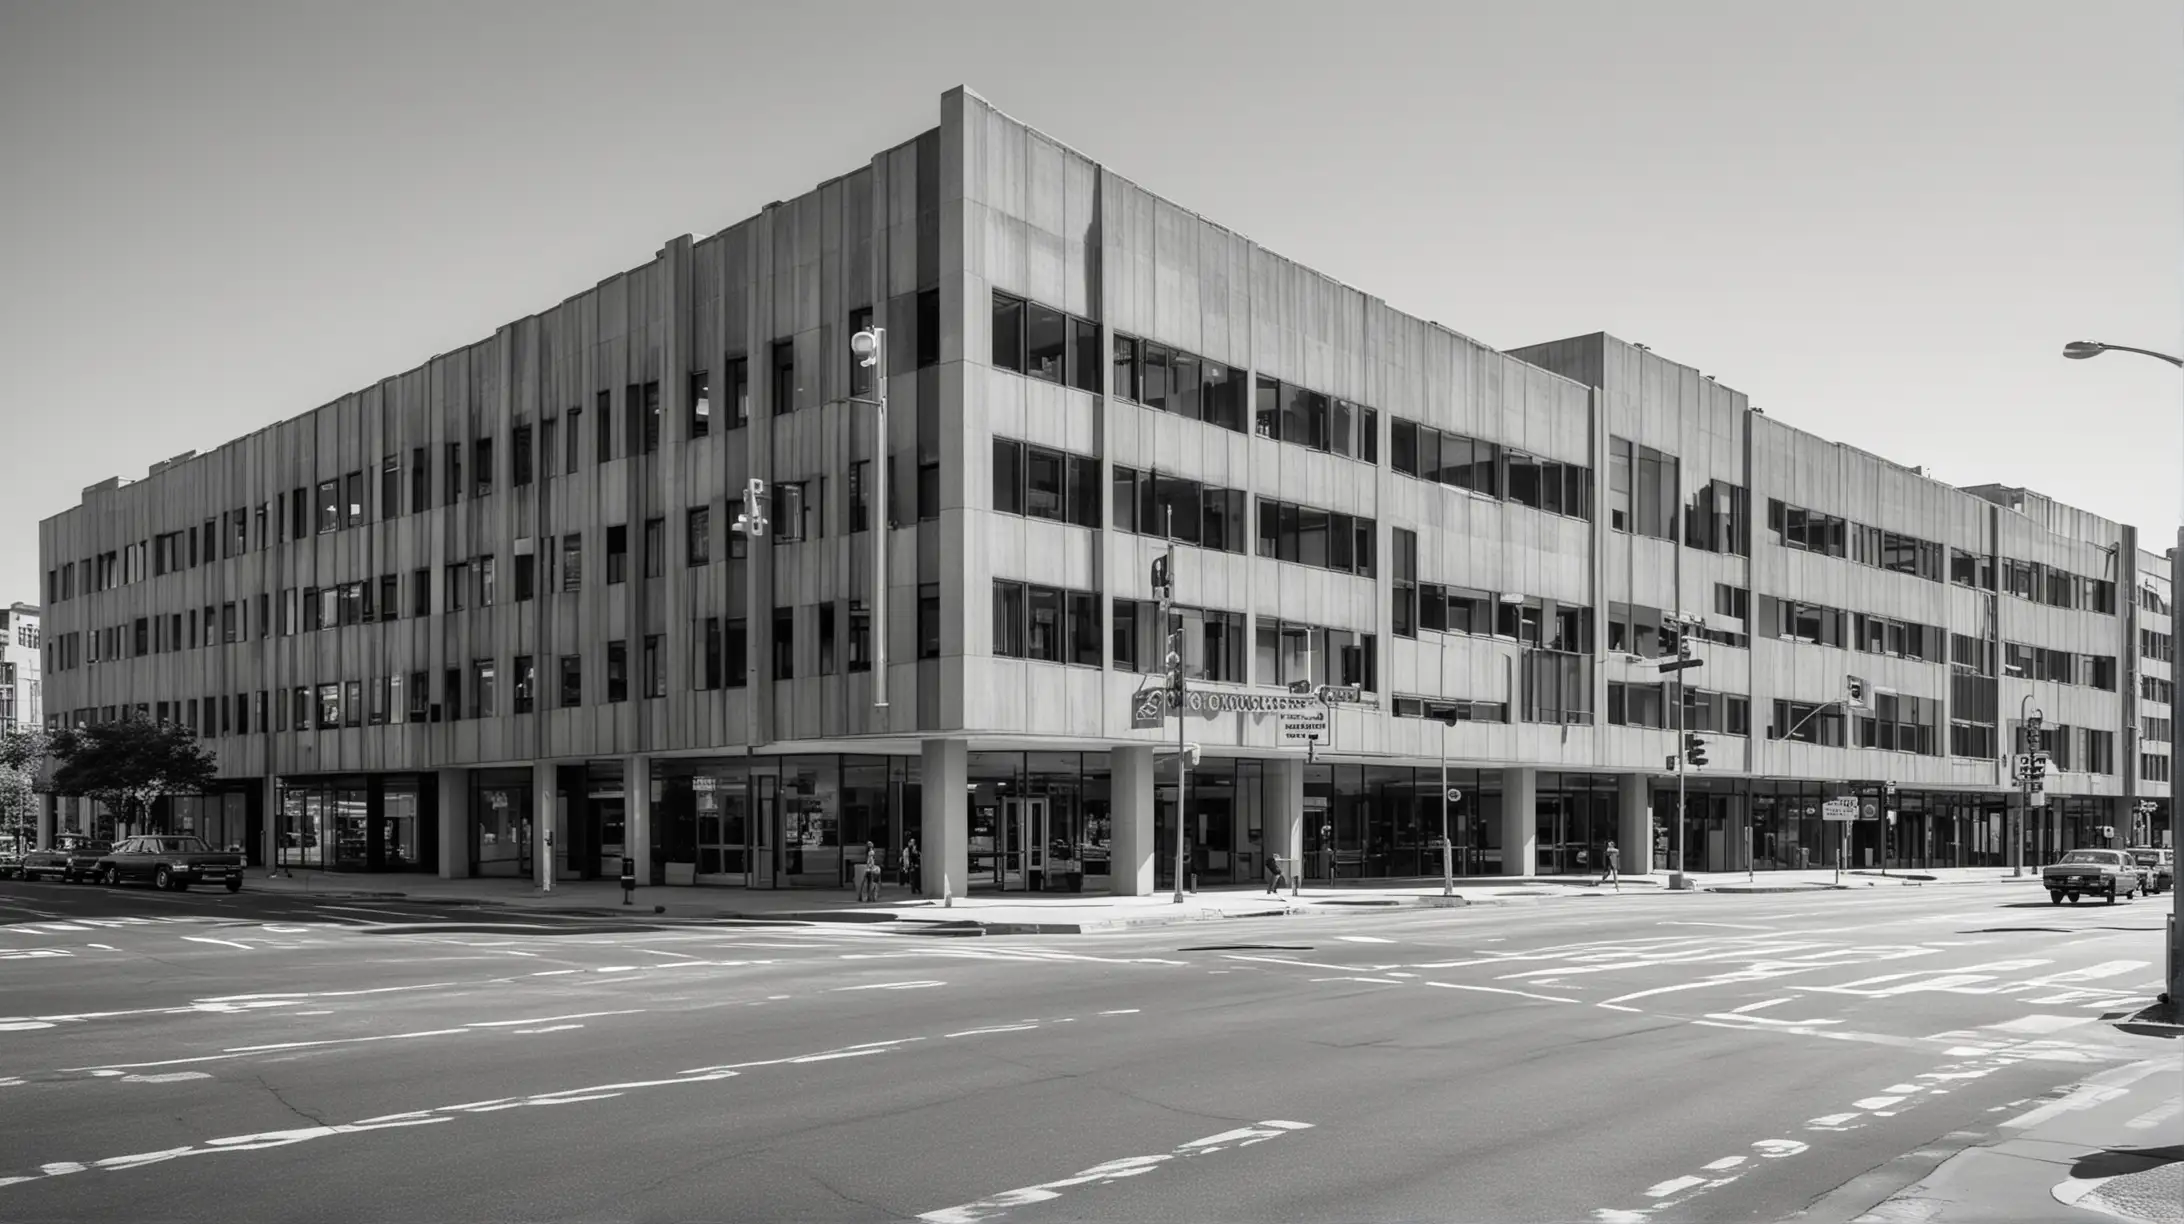 Monochrome MidCentury Modern Office Building at Major City Intersection